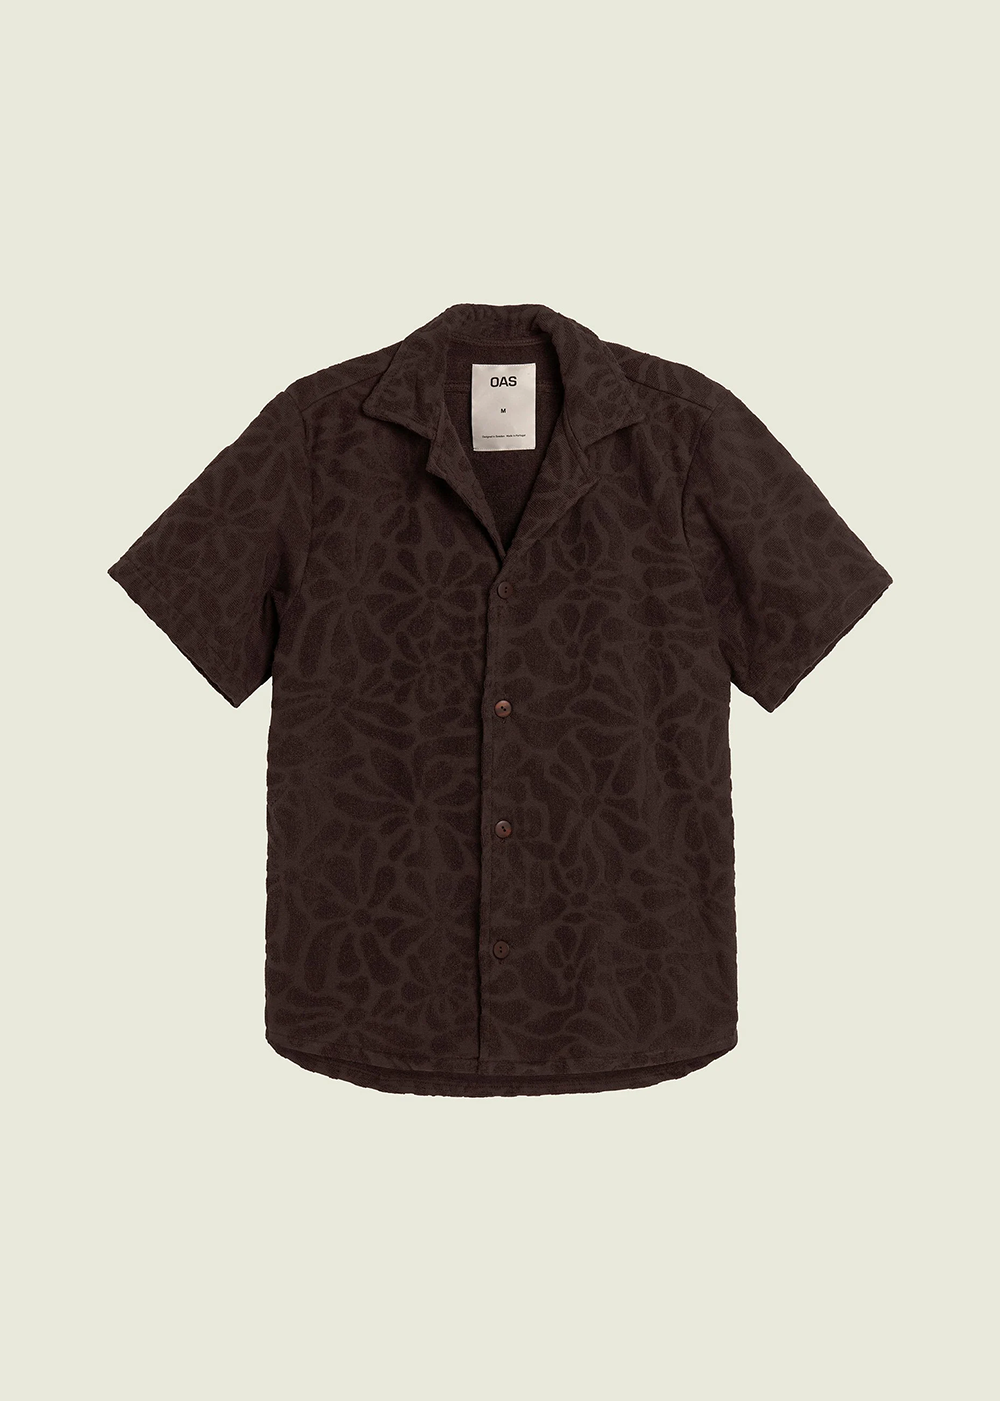 Front view of Blossom Terry Shirt by OAS Company in faded black with a flower blossom design.